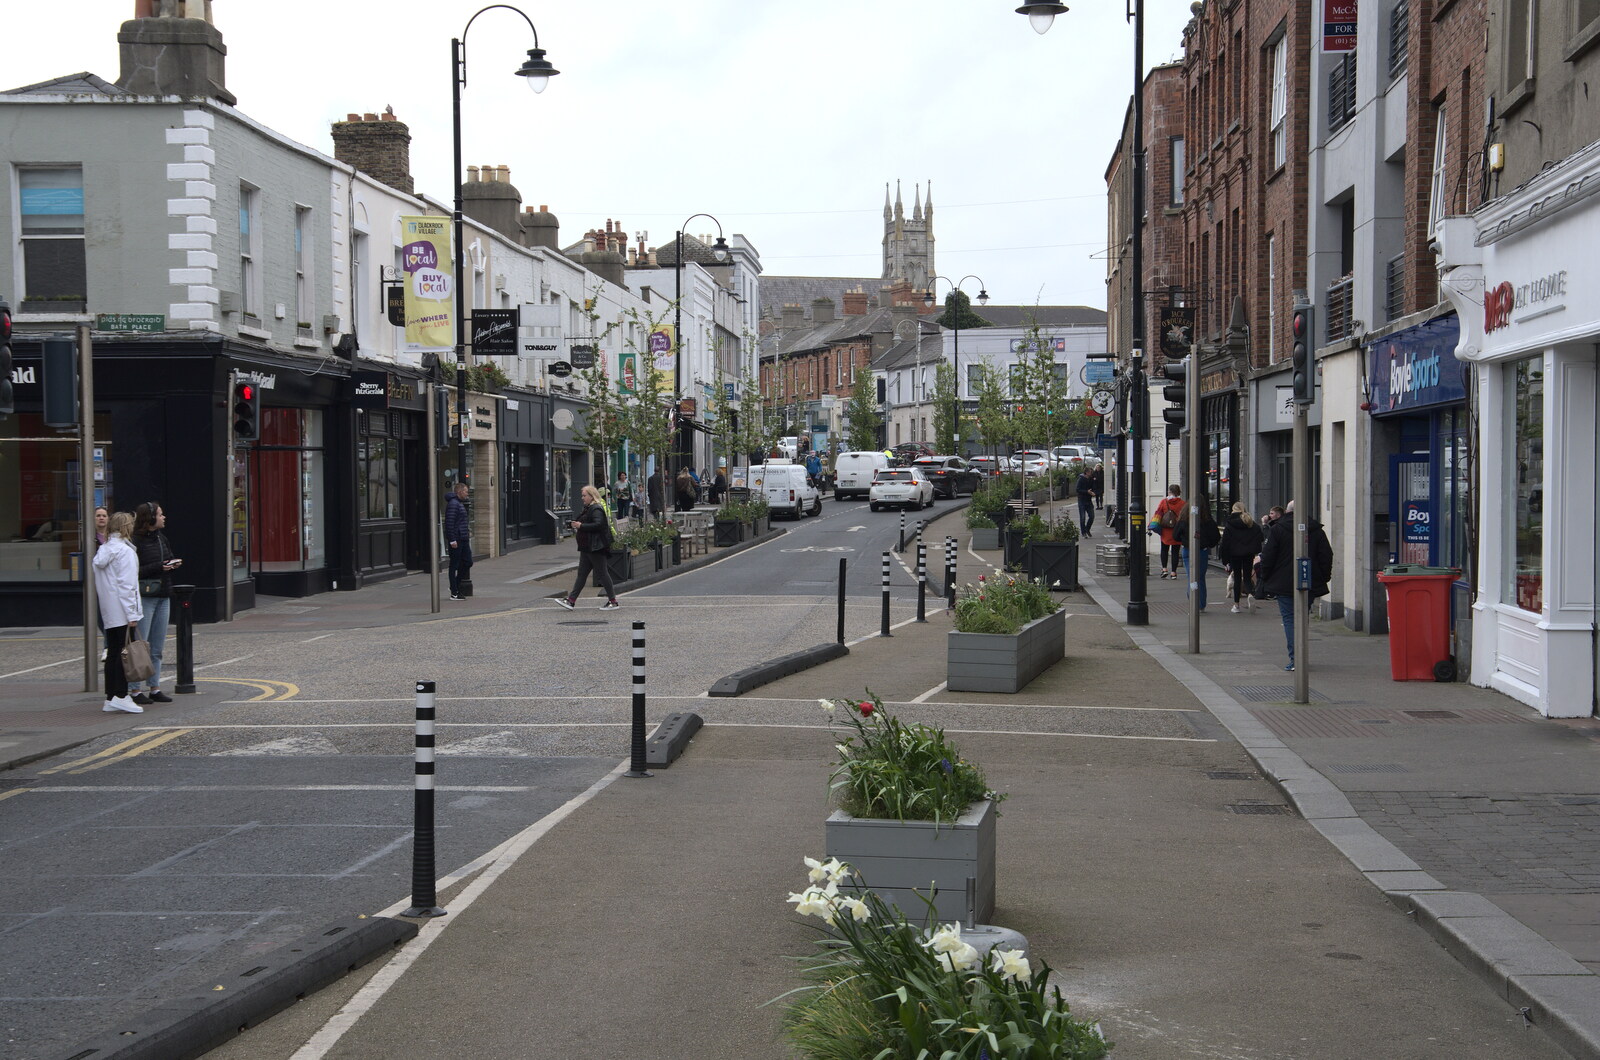 Blackrock North and South, Louth and County Dublin, Ireland - 23rd April 2022: Blackrock High Street